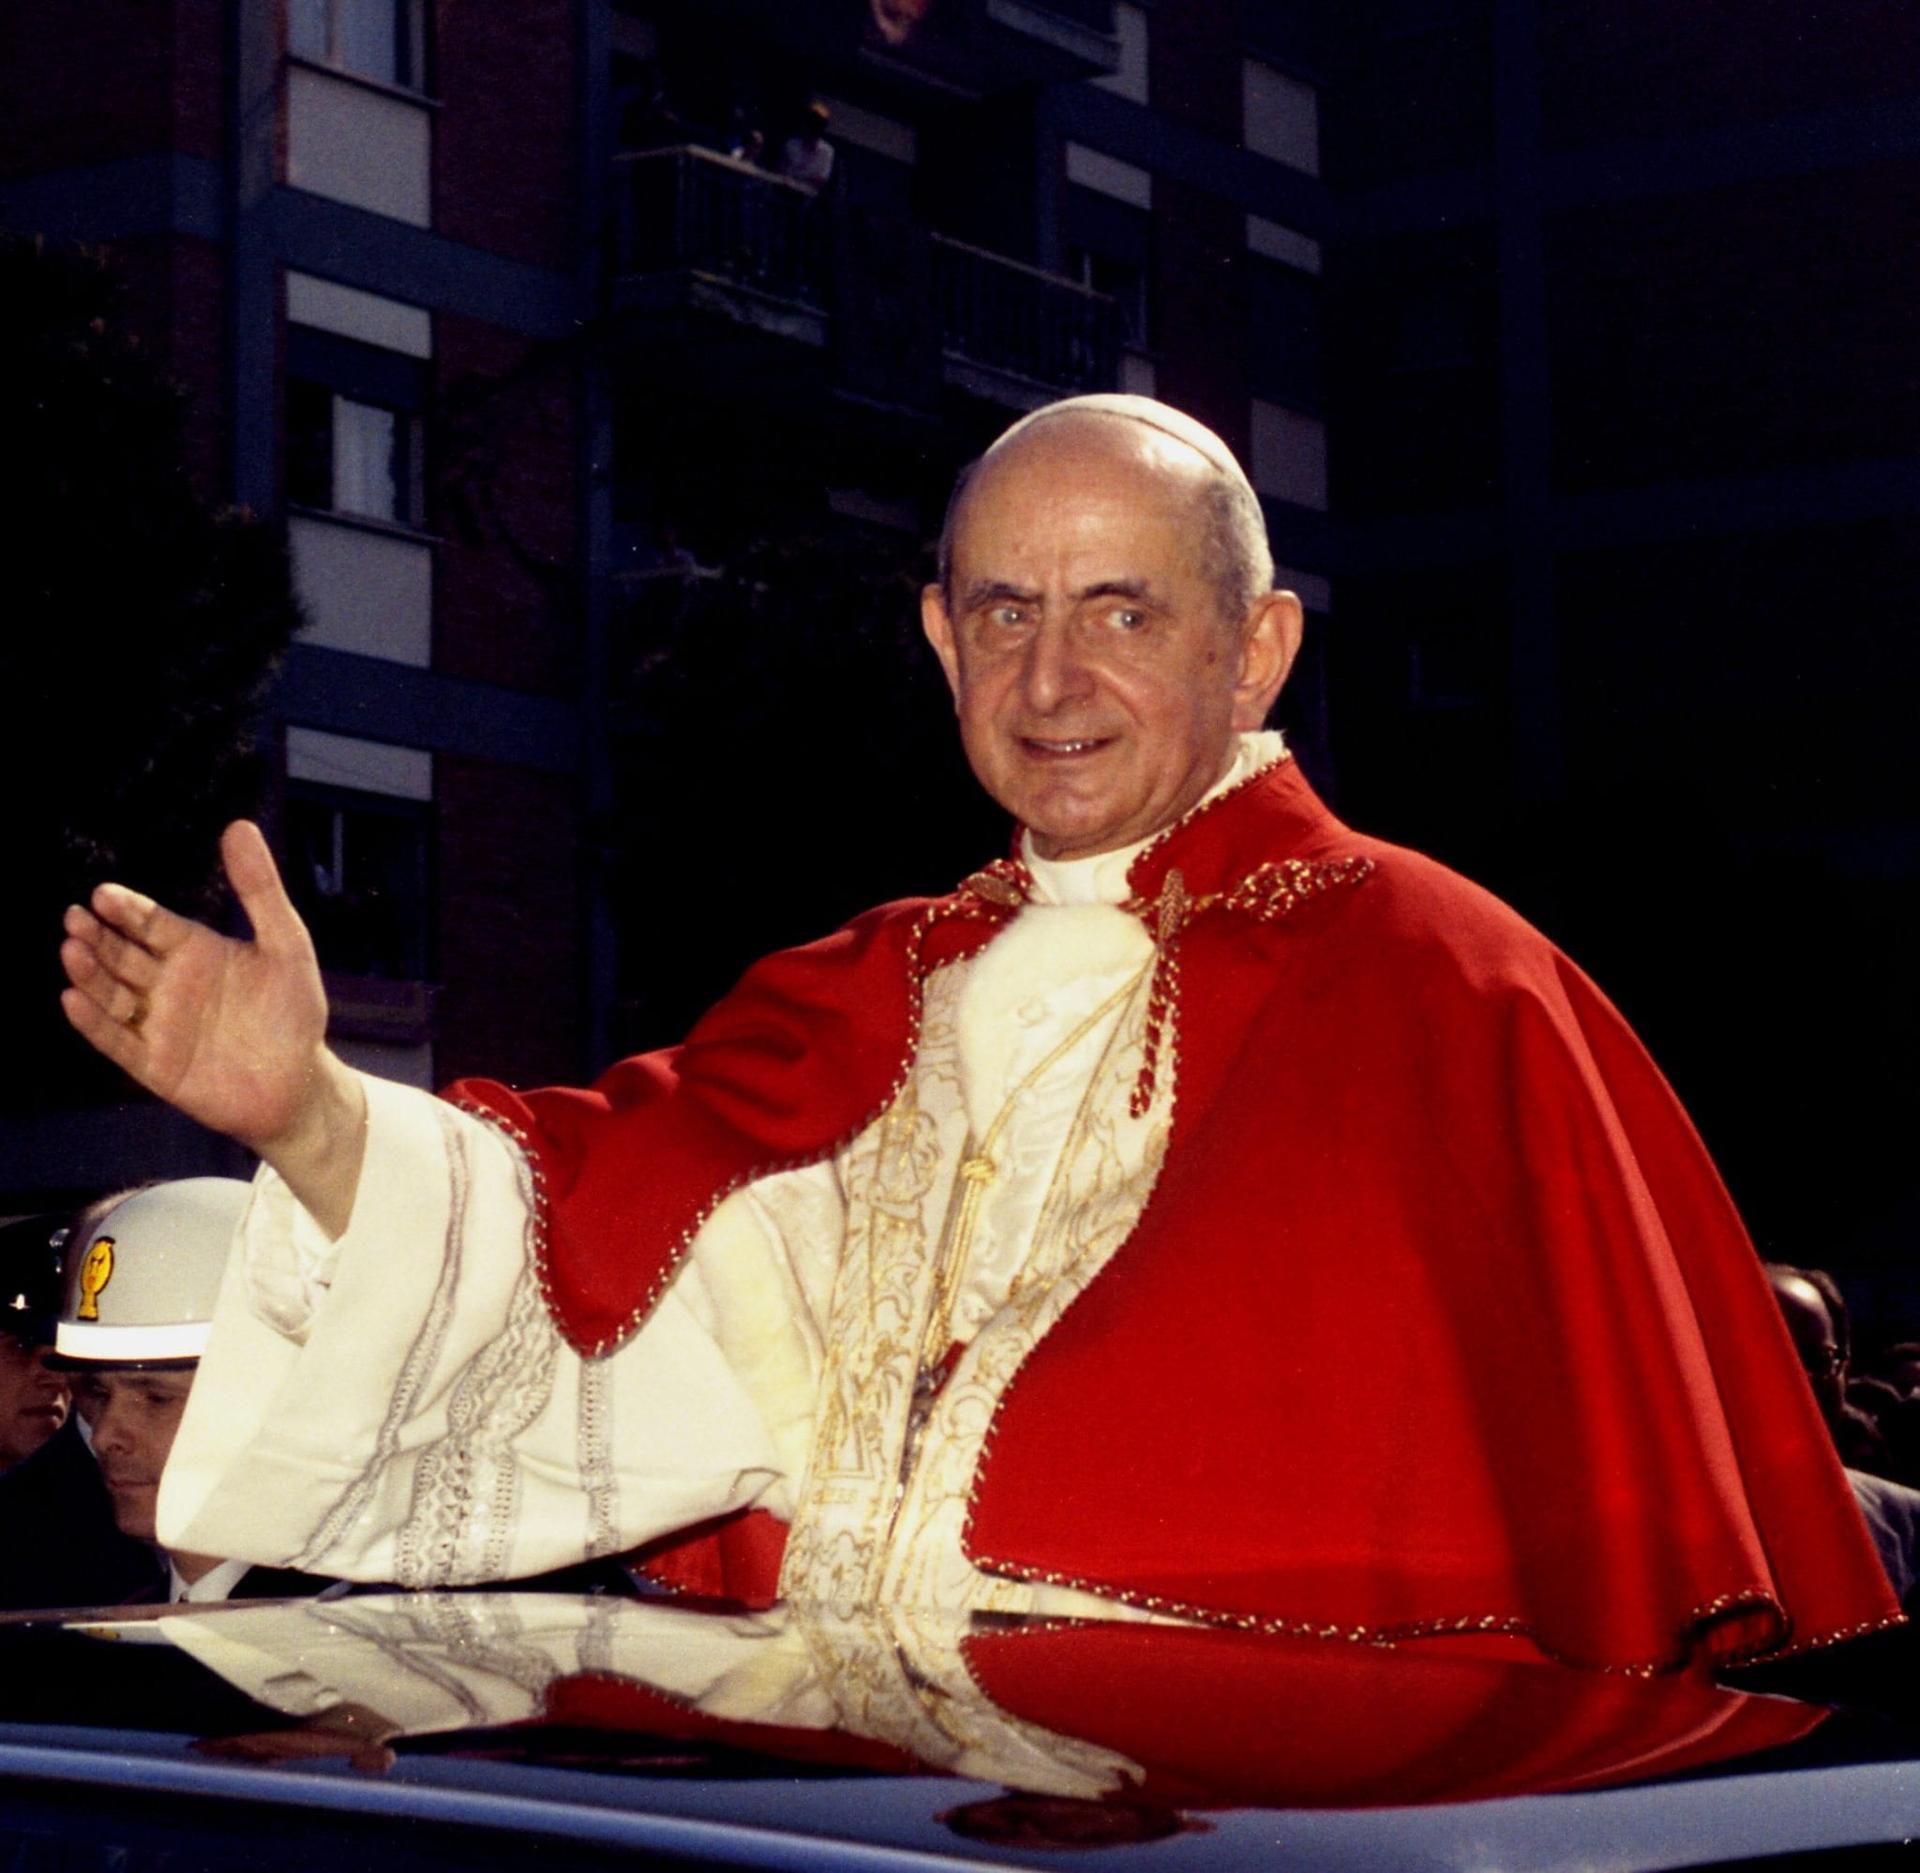 Pondering the parallels between Paul VI and Francis